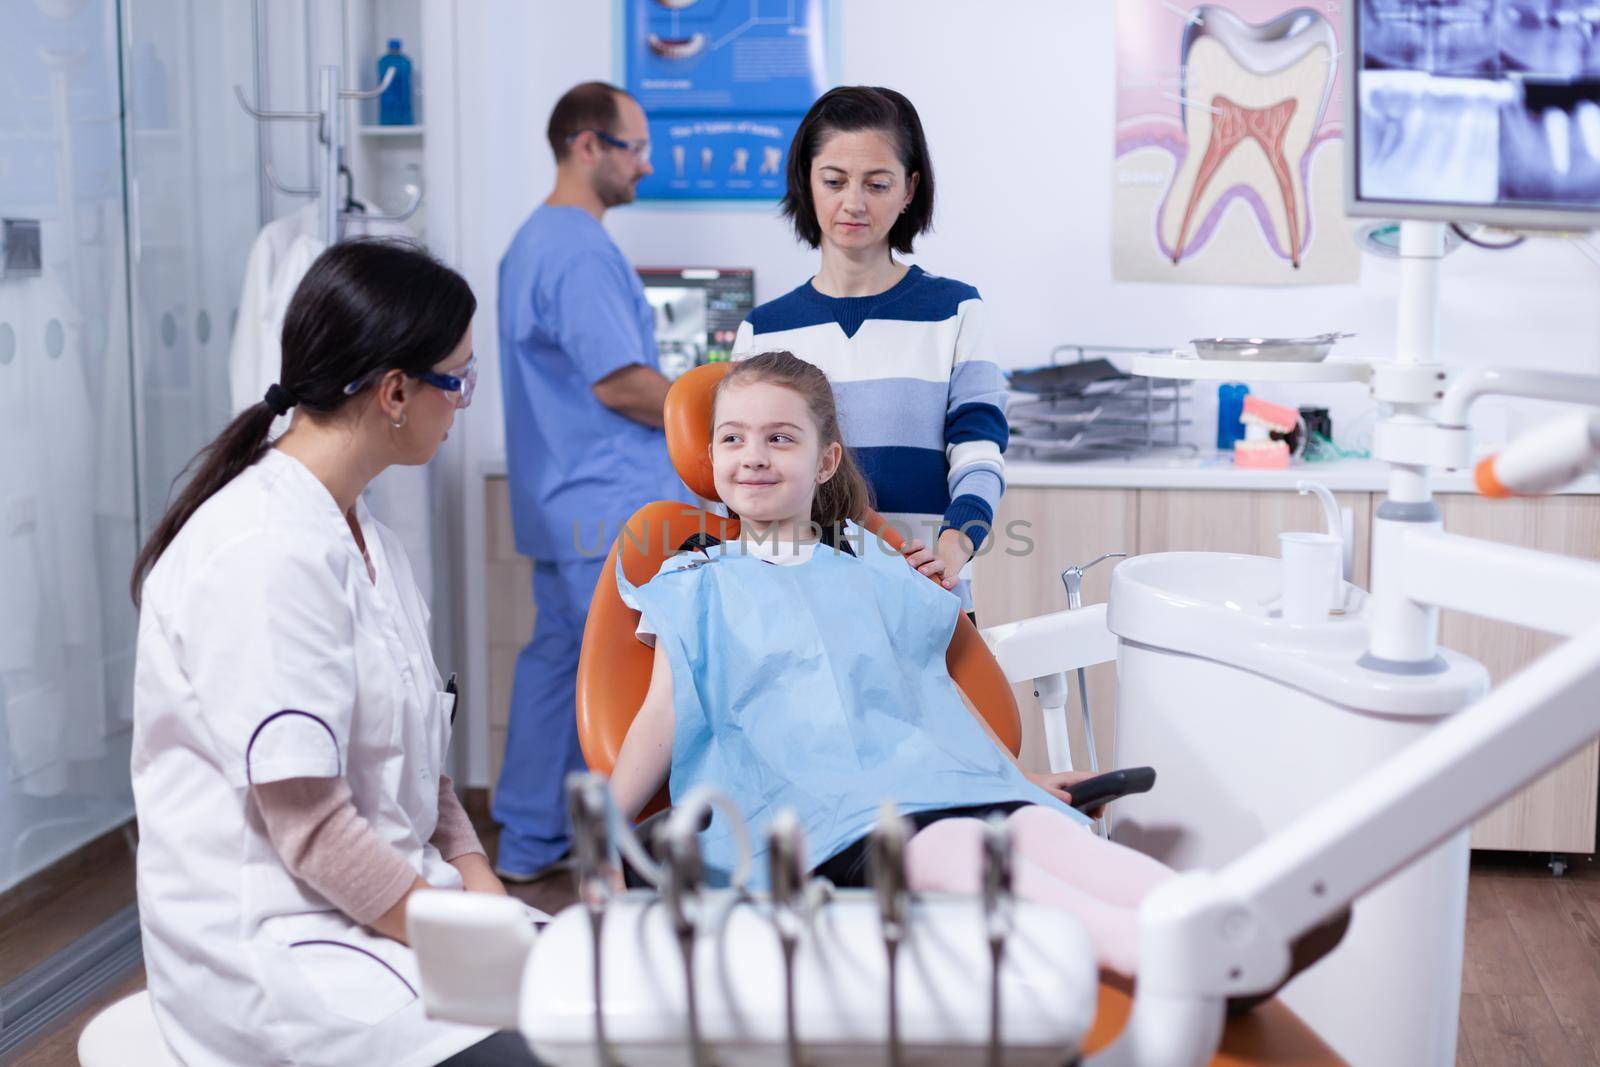 Little girl looking happy at dentist after professional tooth cavity treatment by DCStudio